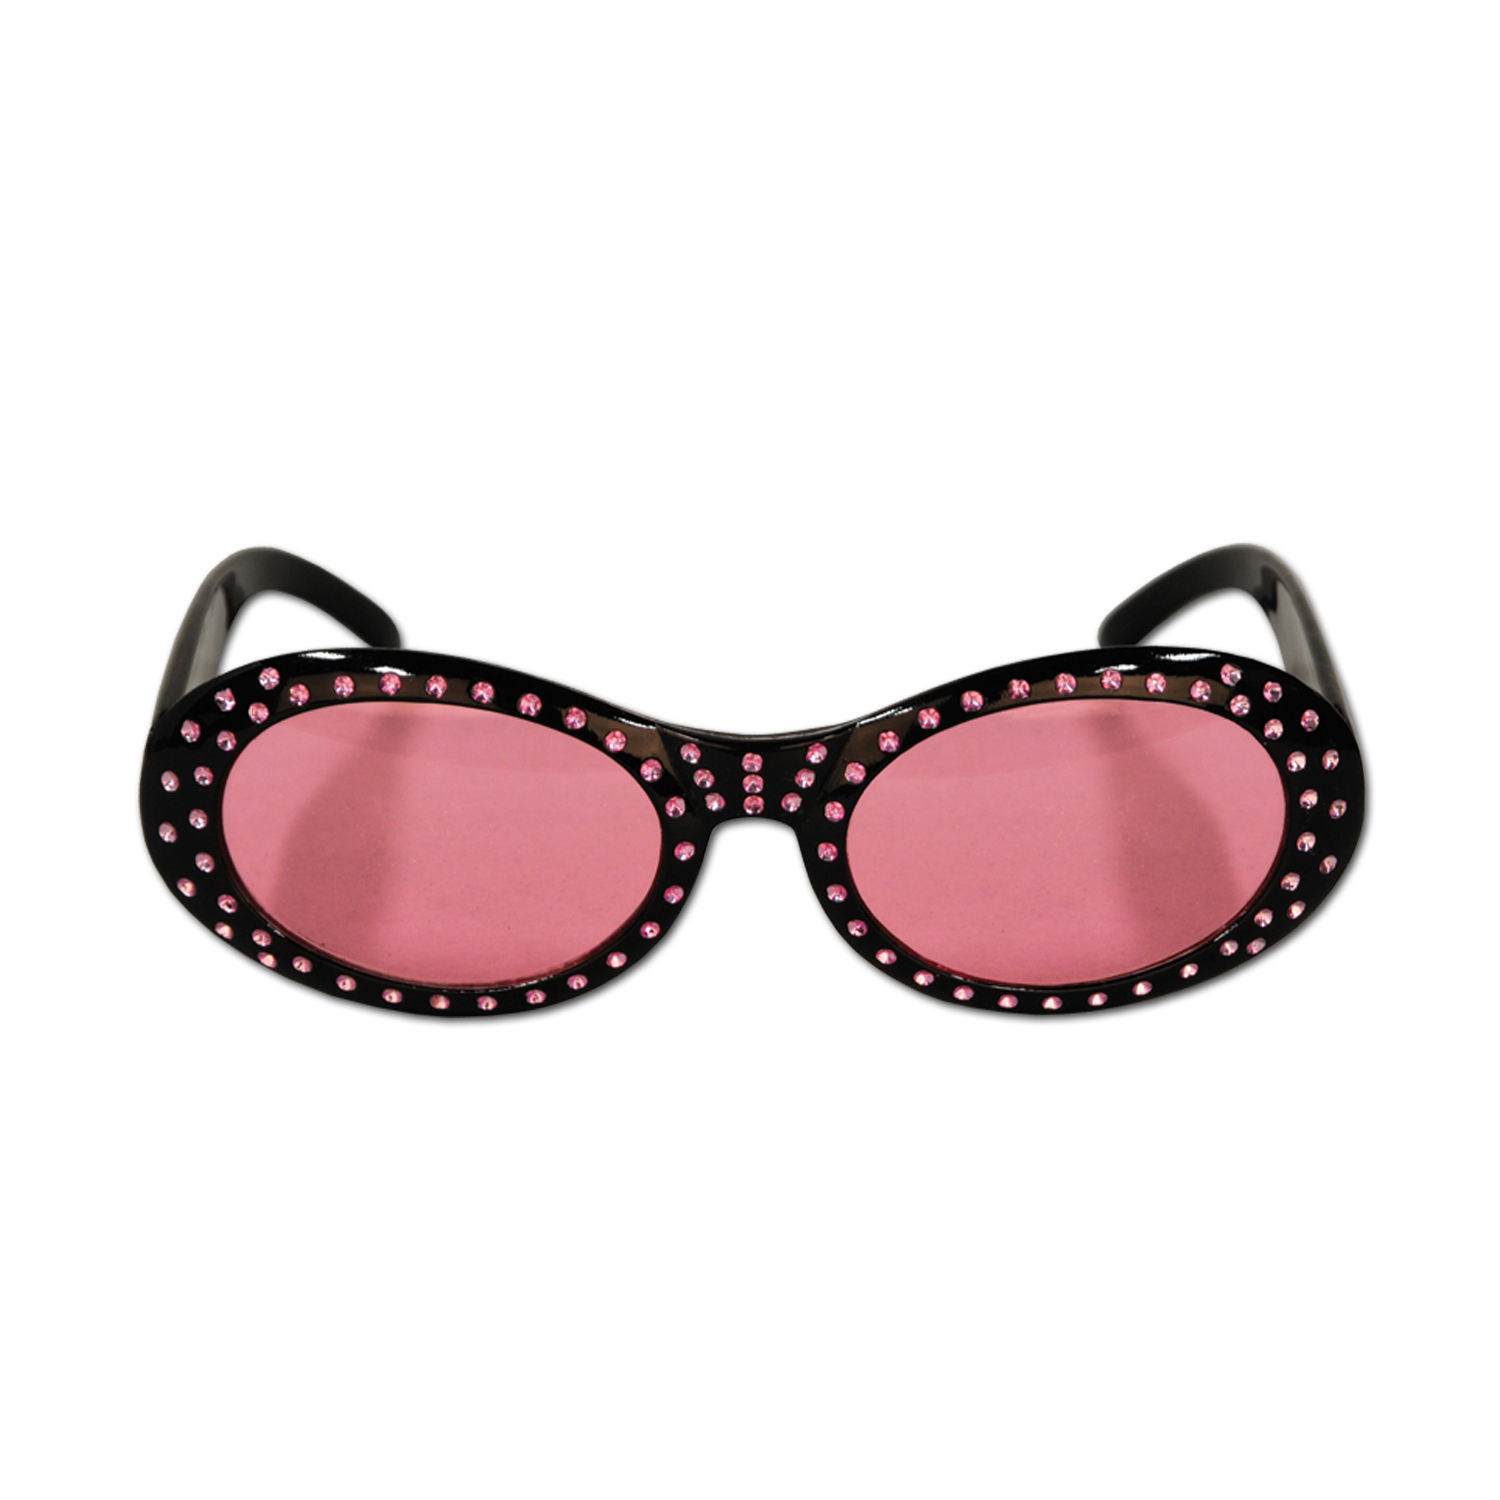 pink and black diva eye glasses with jewels around the frame